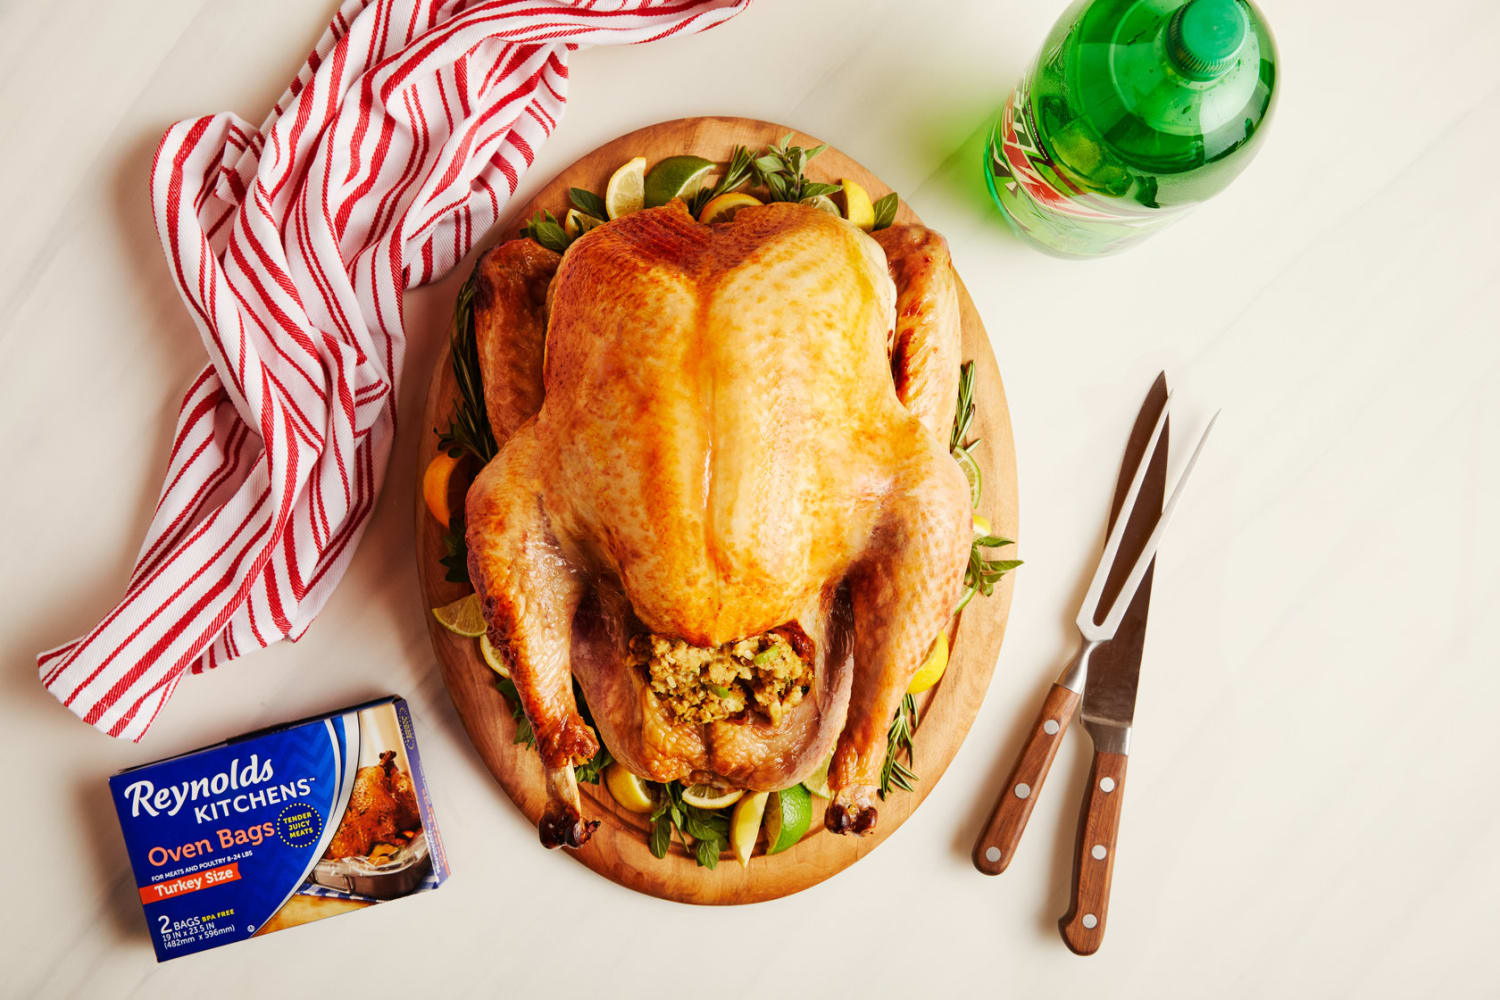 Reynolds Turkey Oven Bags - Perfect Turkey Every Time, Turkey, oven, Perfect turkey, every time., By Reynolds Brands